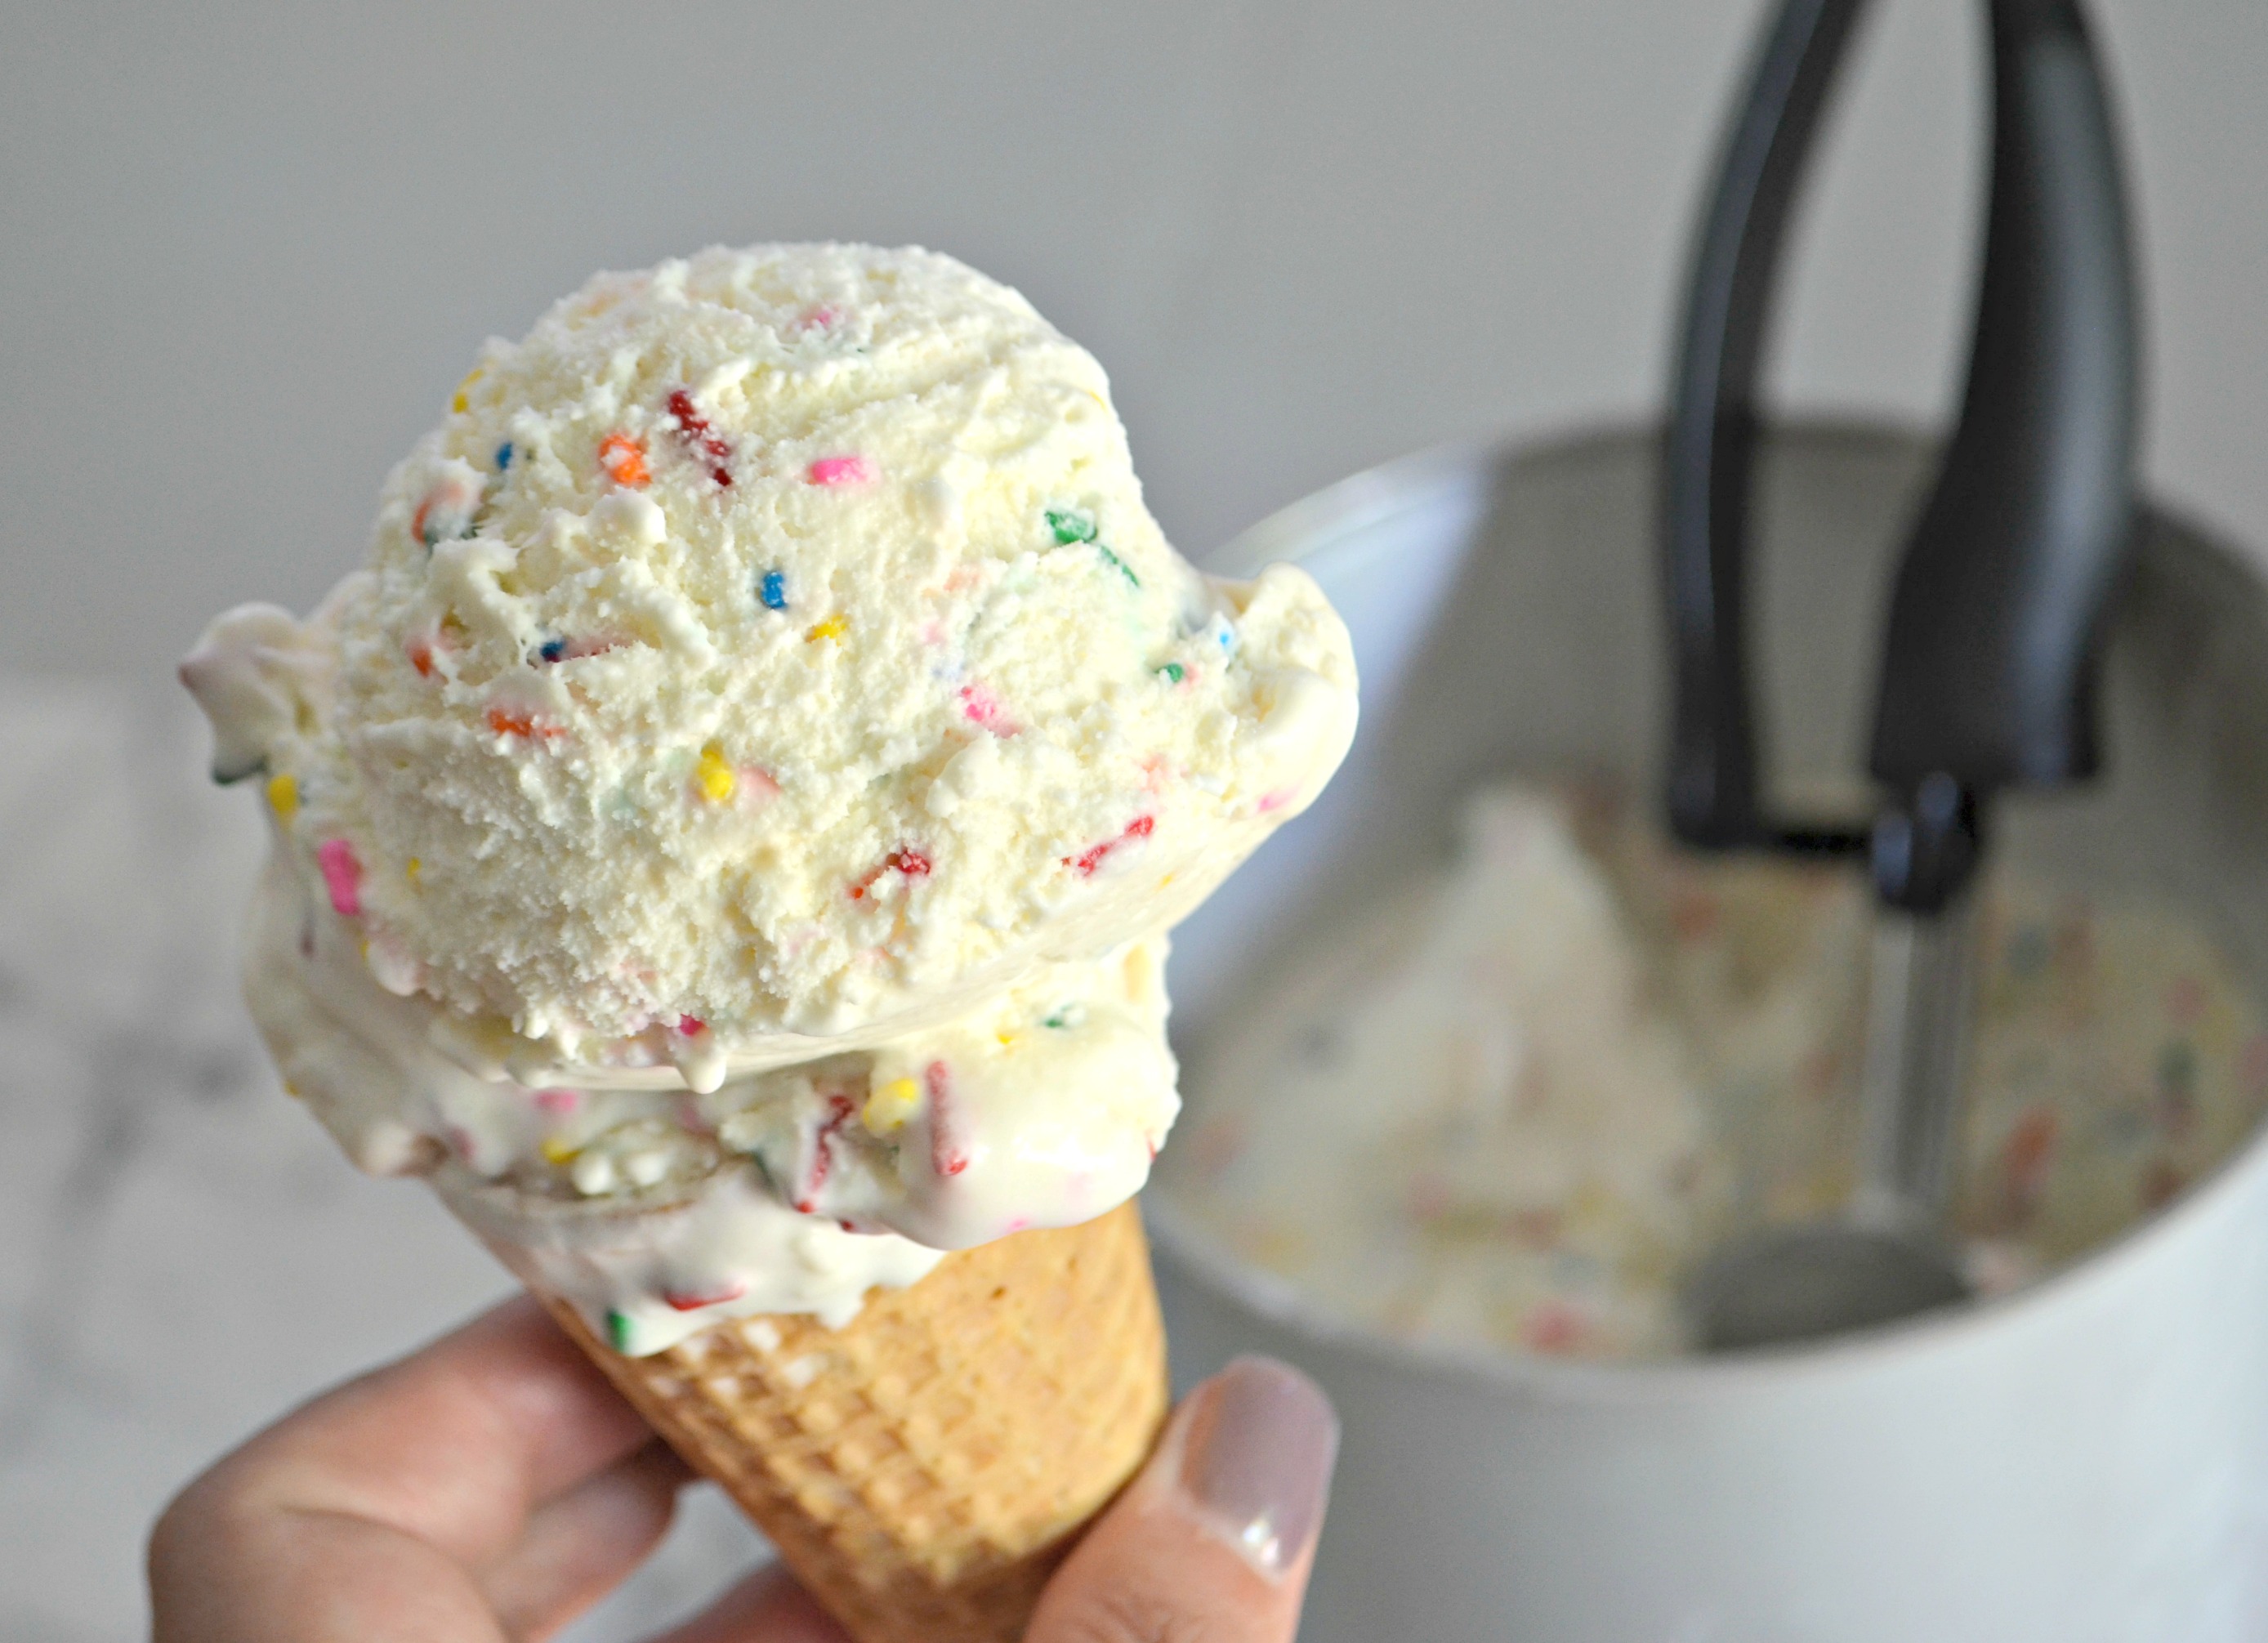 homemade cake batter ice cream – Scooped into a cone